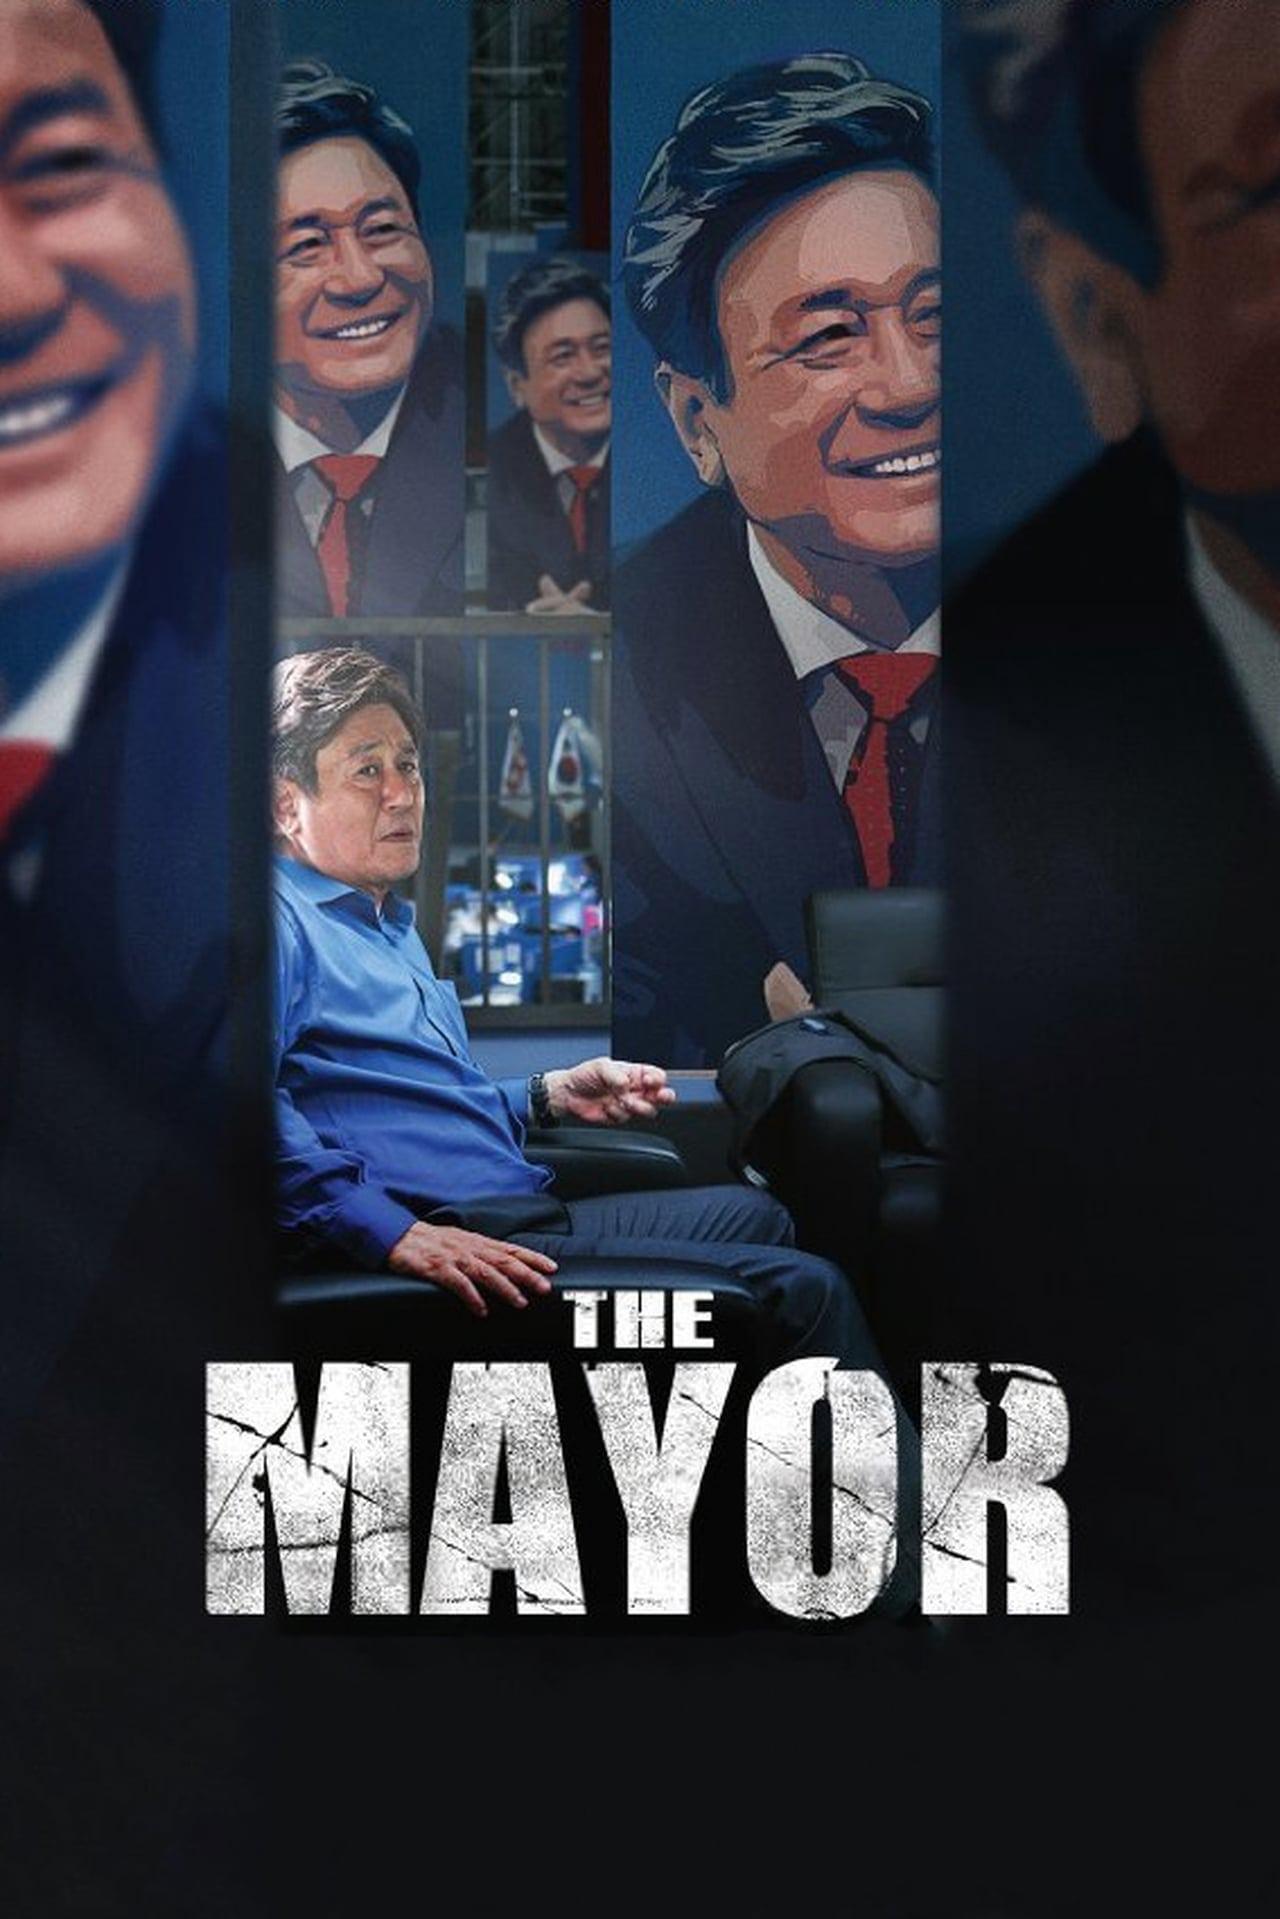 The Mayor poster